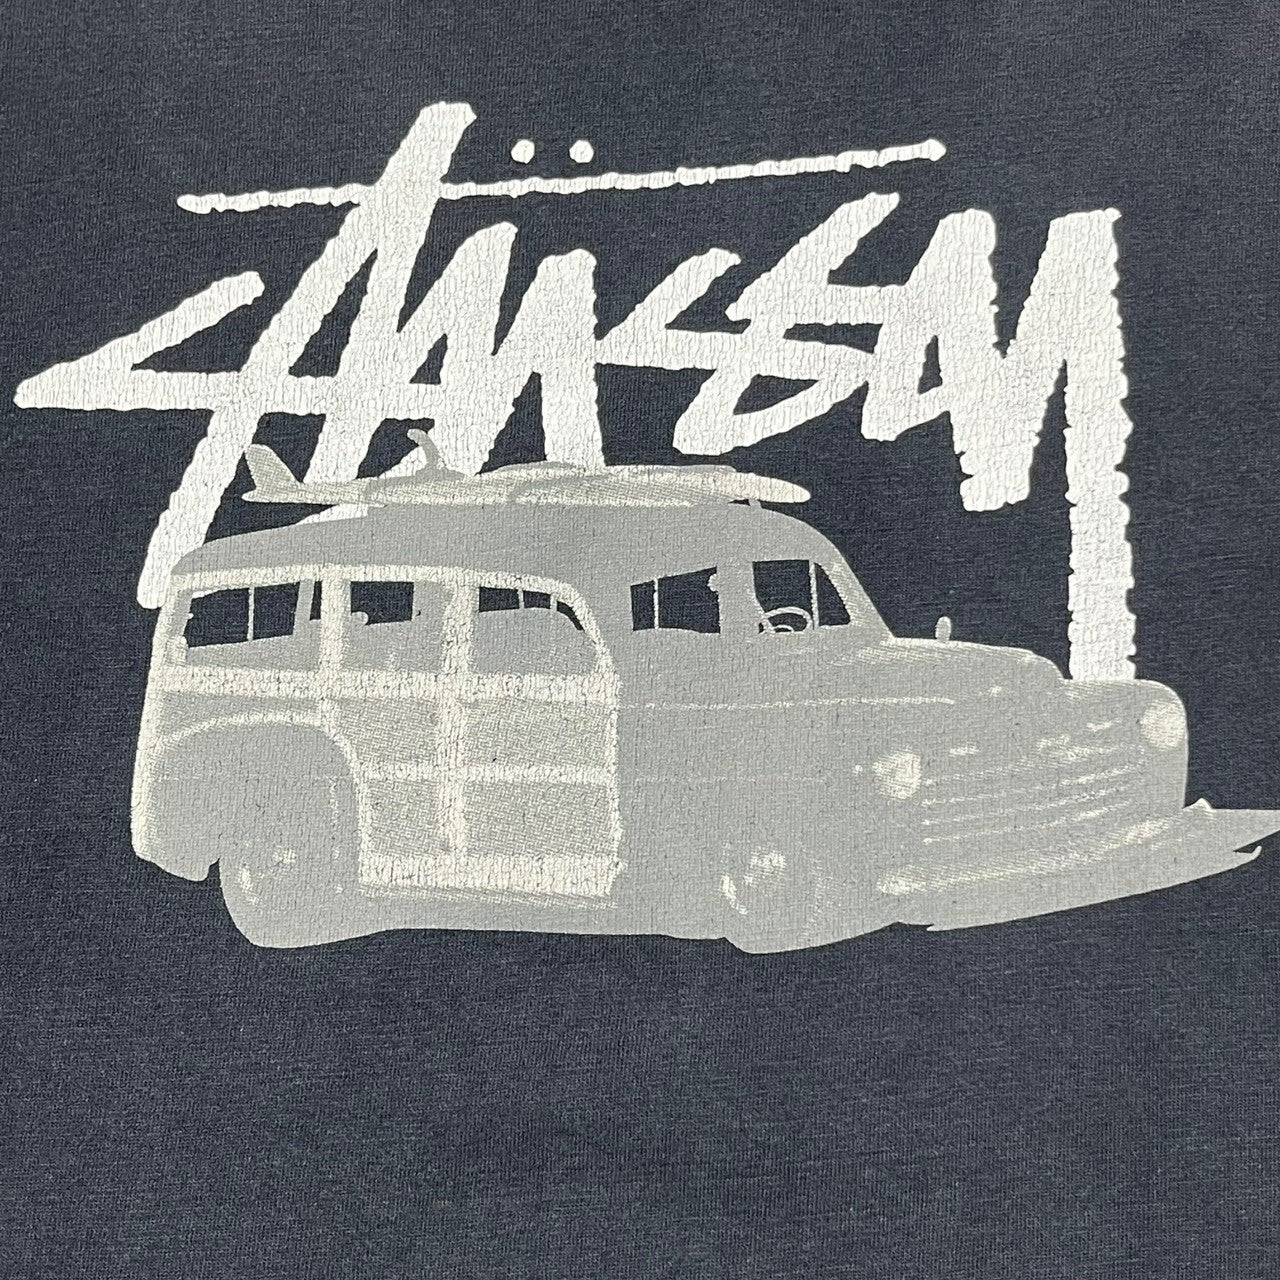 STUSSY(ステューシー) 90's~00's car loaded with surfboards Tシャツ サーフボード 車 紺タグ SIZE M ブラック OLD STUSSY